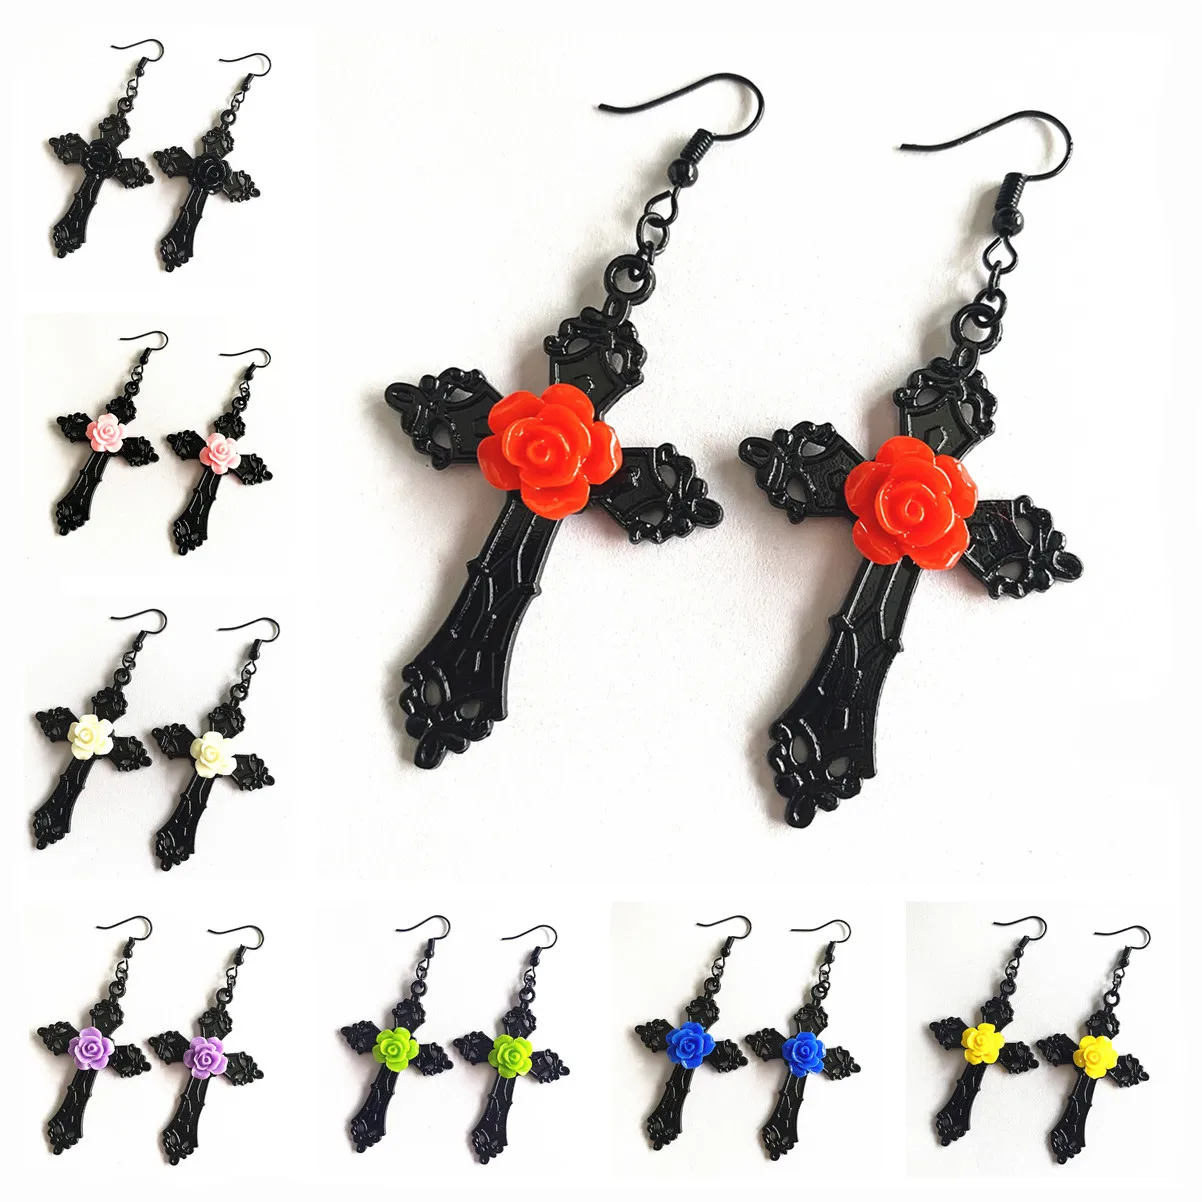 

Gothic Cross Earrings with Red Rose Detail Trad Goth Fashion Jewellery Unique Big Pendant Women Classical Gift Beautiful New